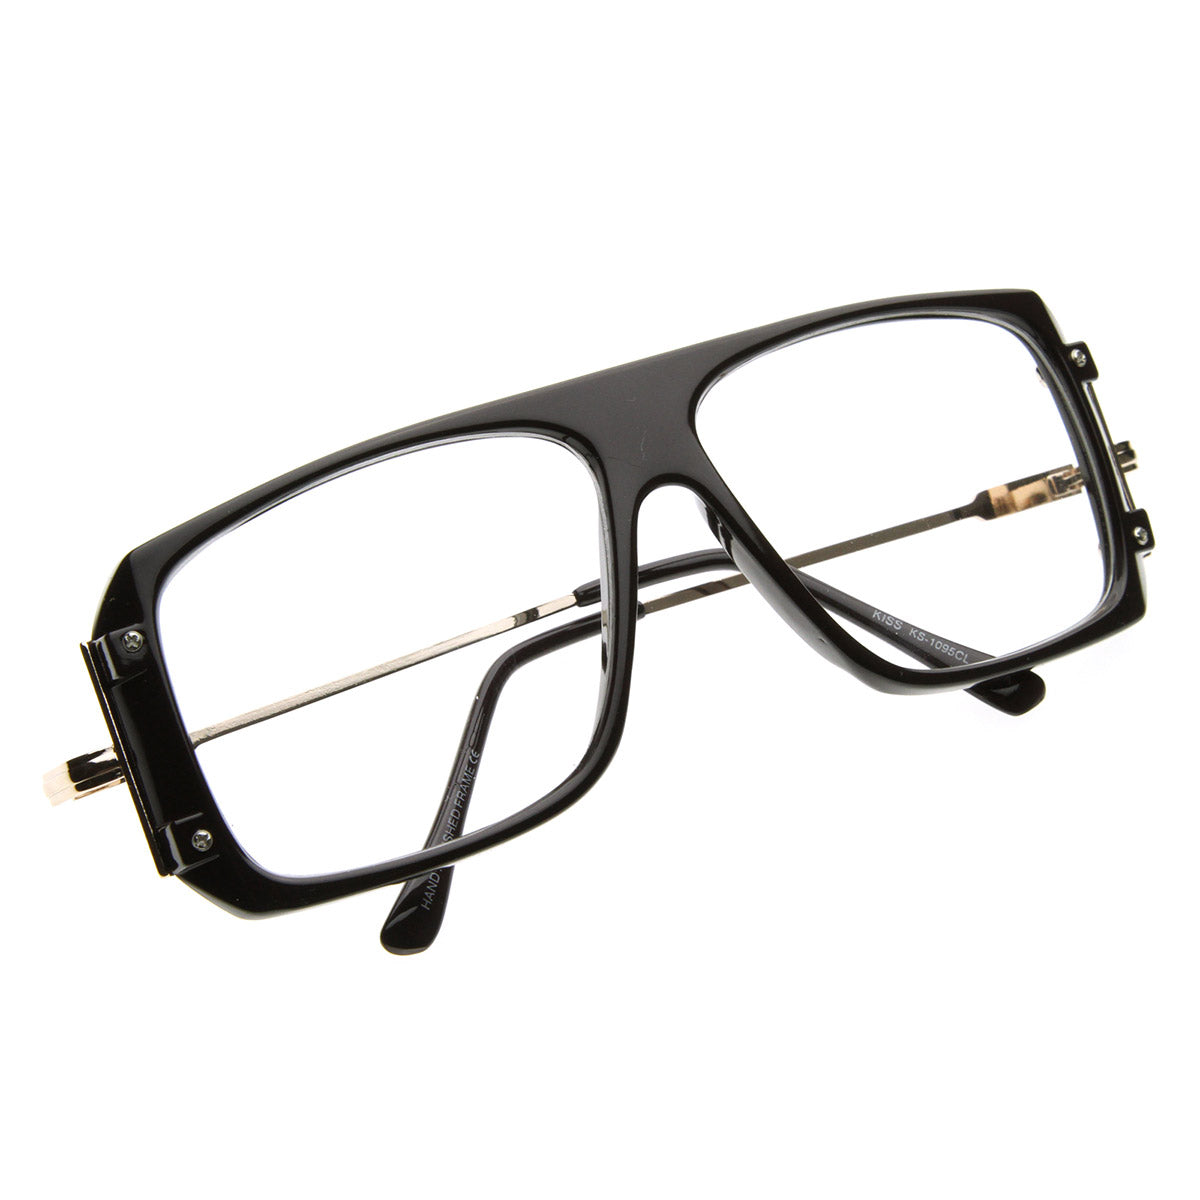 Vintage Inspired Square Clear Lens Glasses - sunglass.la